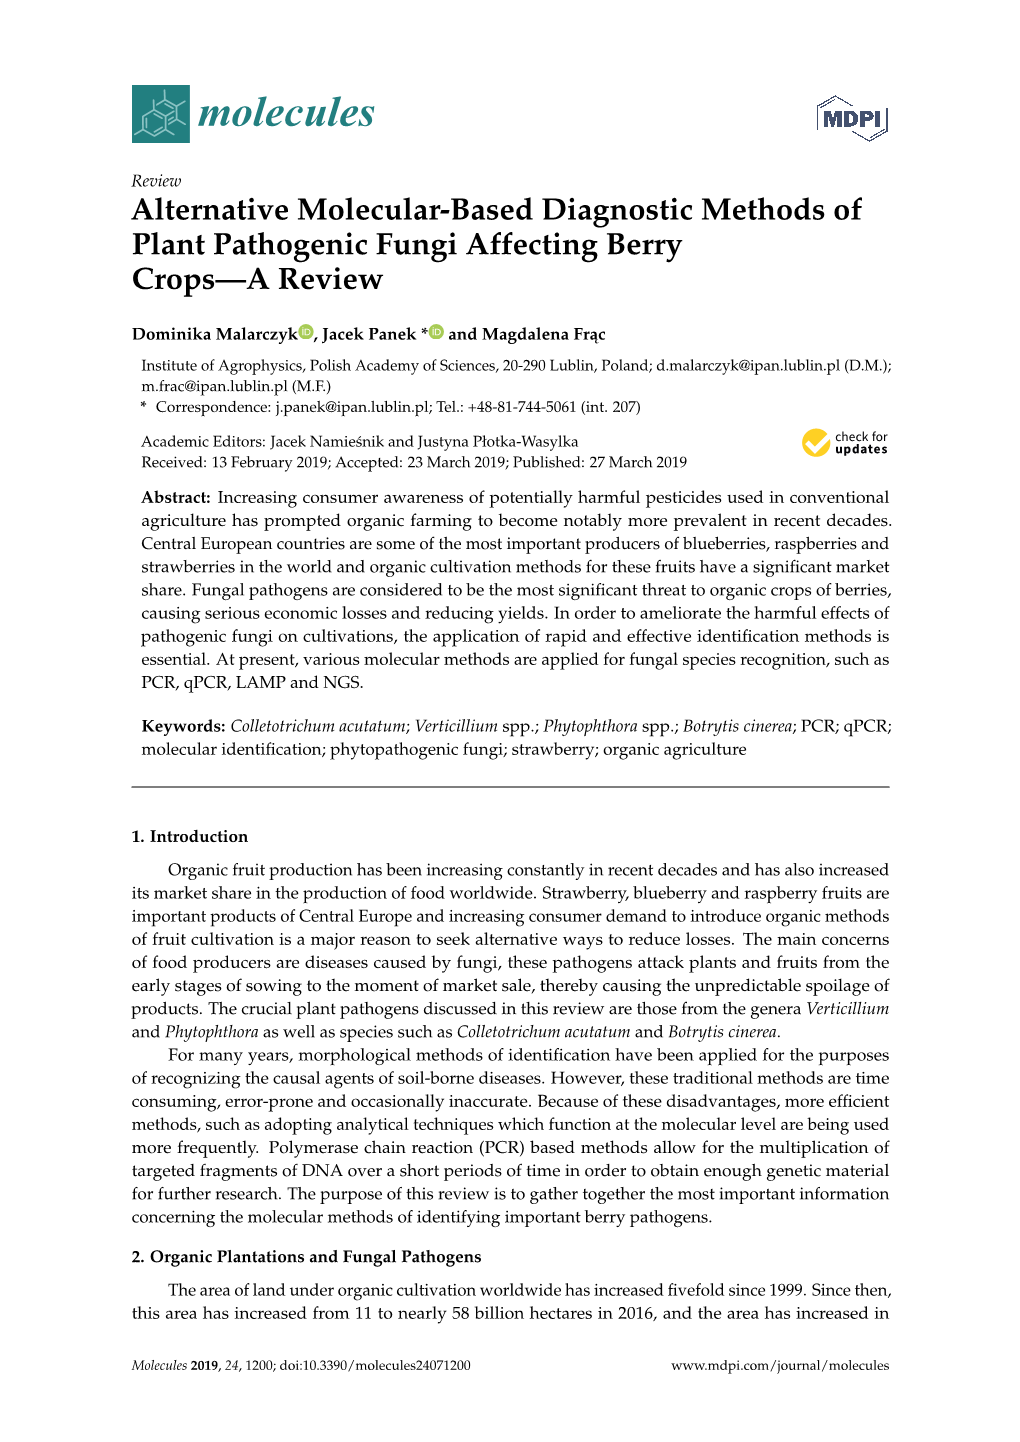 Alternative Molecular-Based Diagnostic Methods of Plant Pathogenic Fungi Affecting Berry Crops—A Review